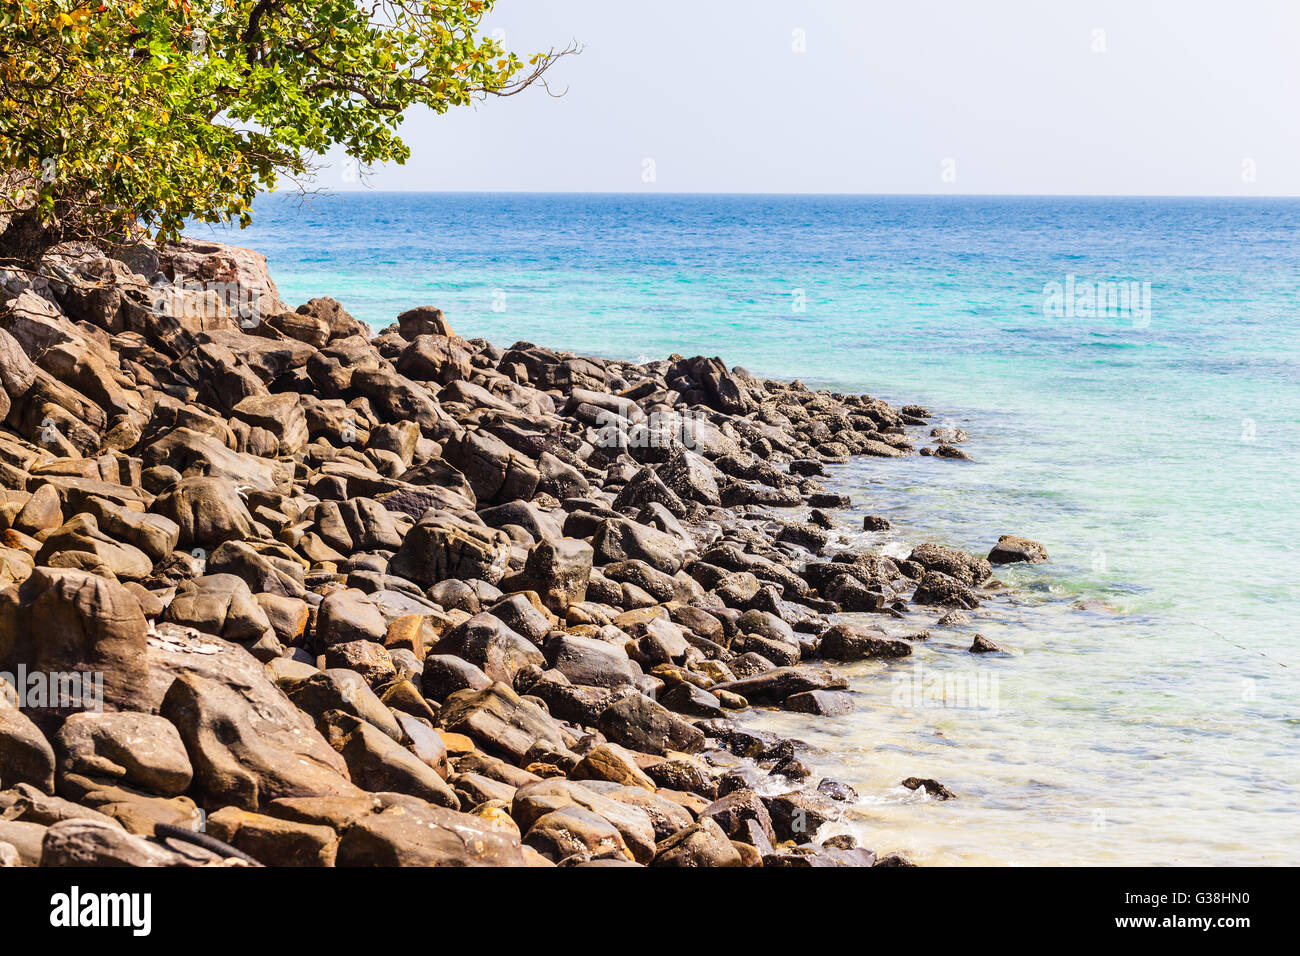 a rocky beach in a tropical island with vibrant azure sea Stock Photo